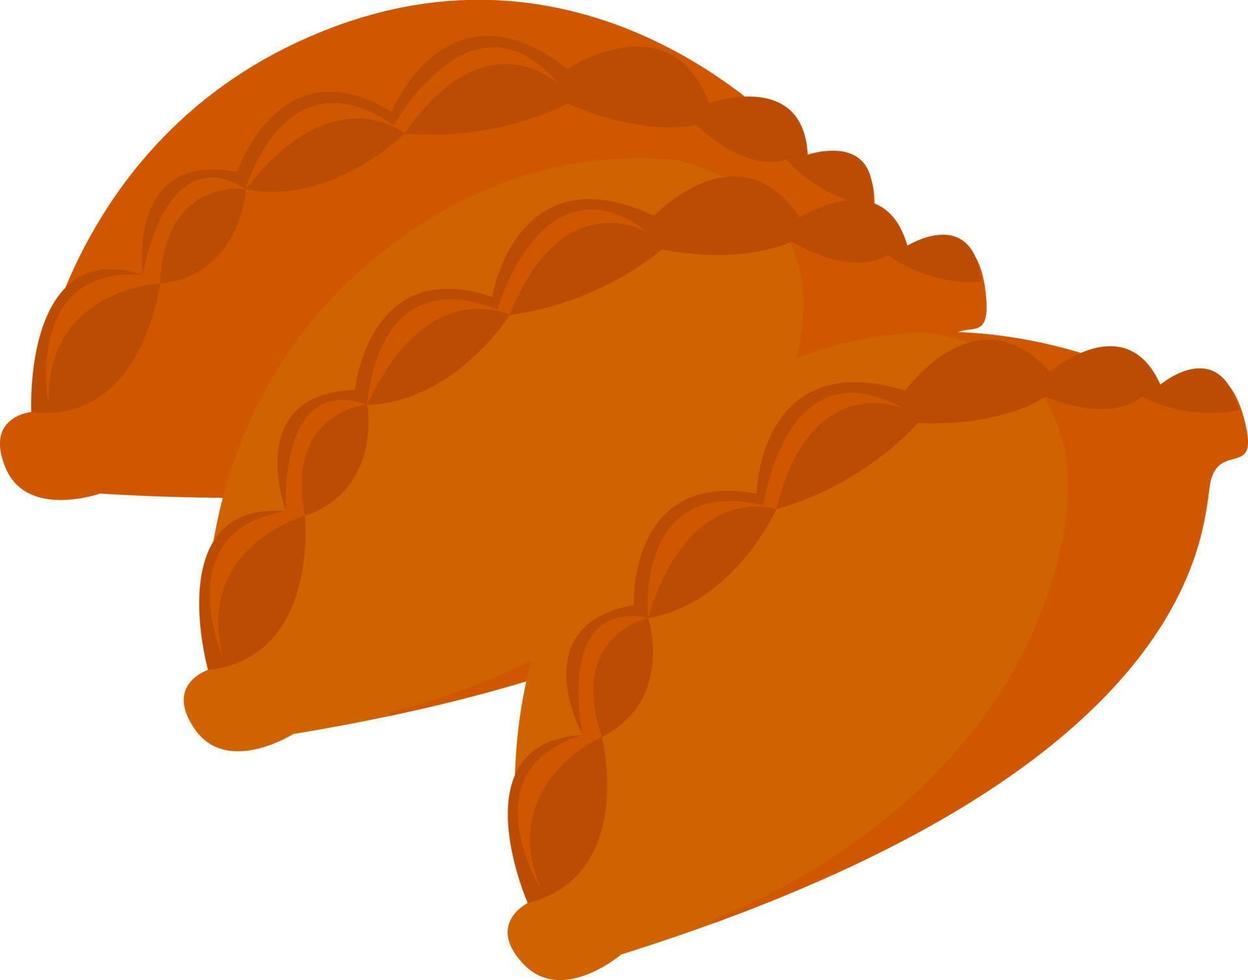 Pies with potatoes, illustration, vector on white background.